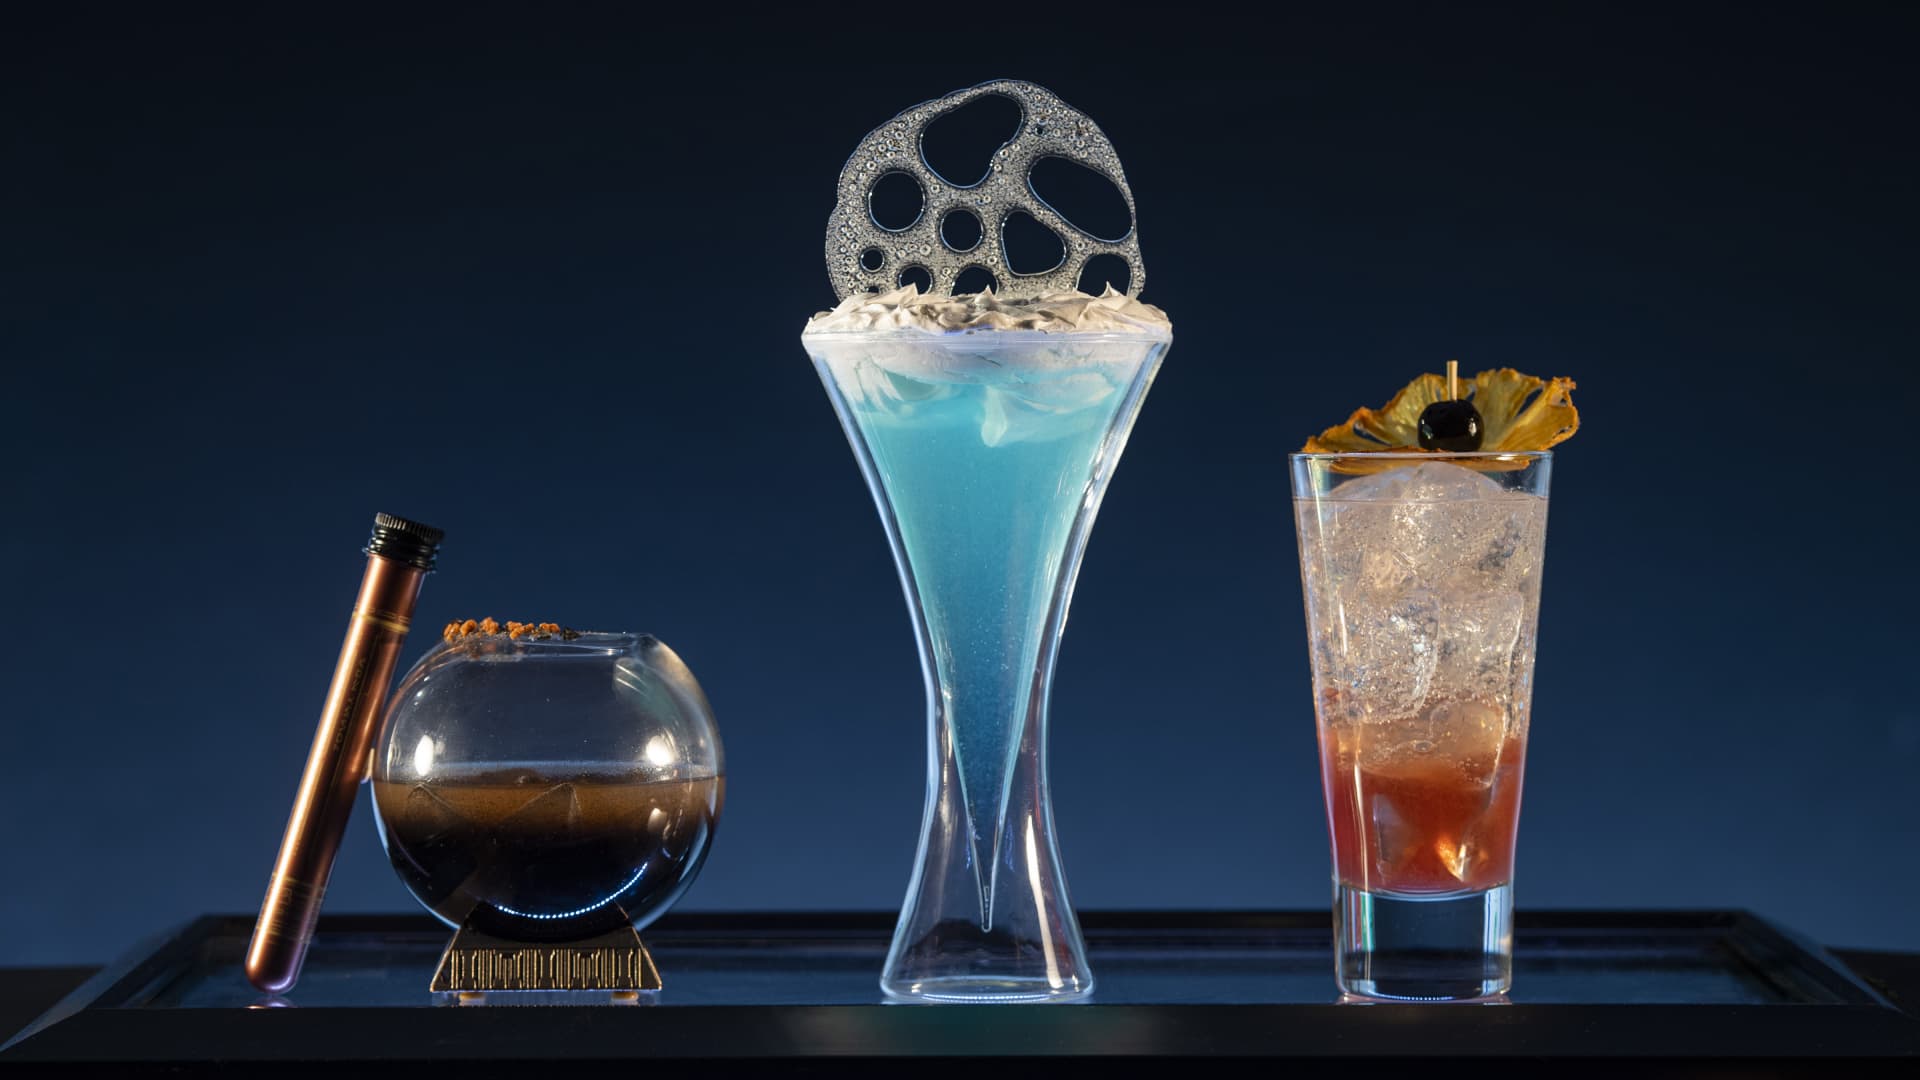 A sample of cocktails available onboard the Halcyon.